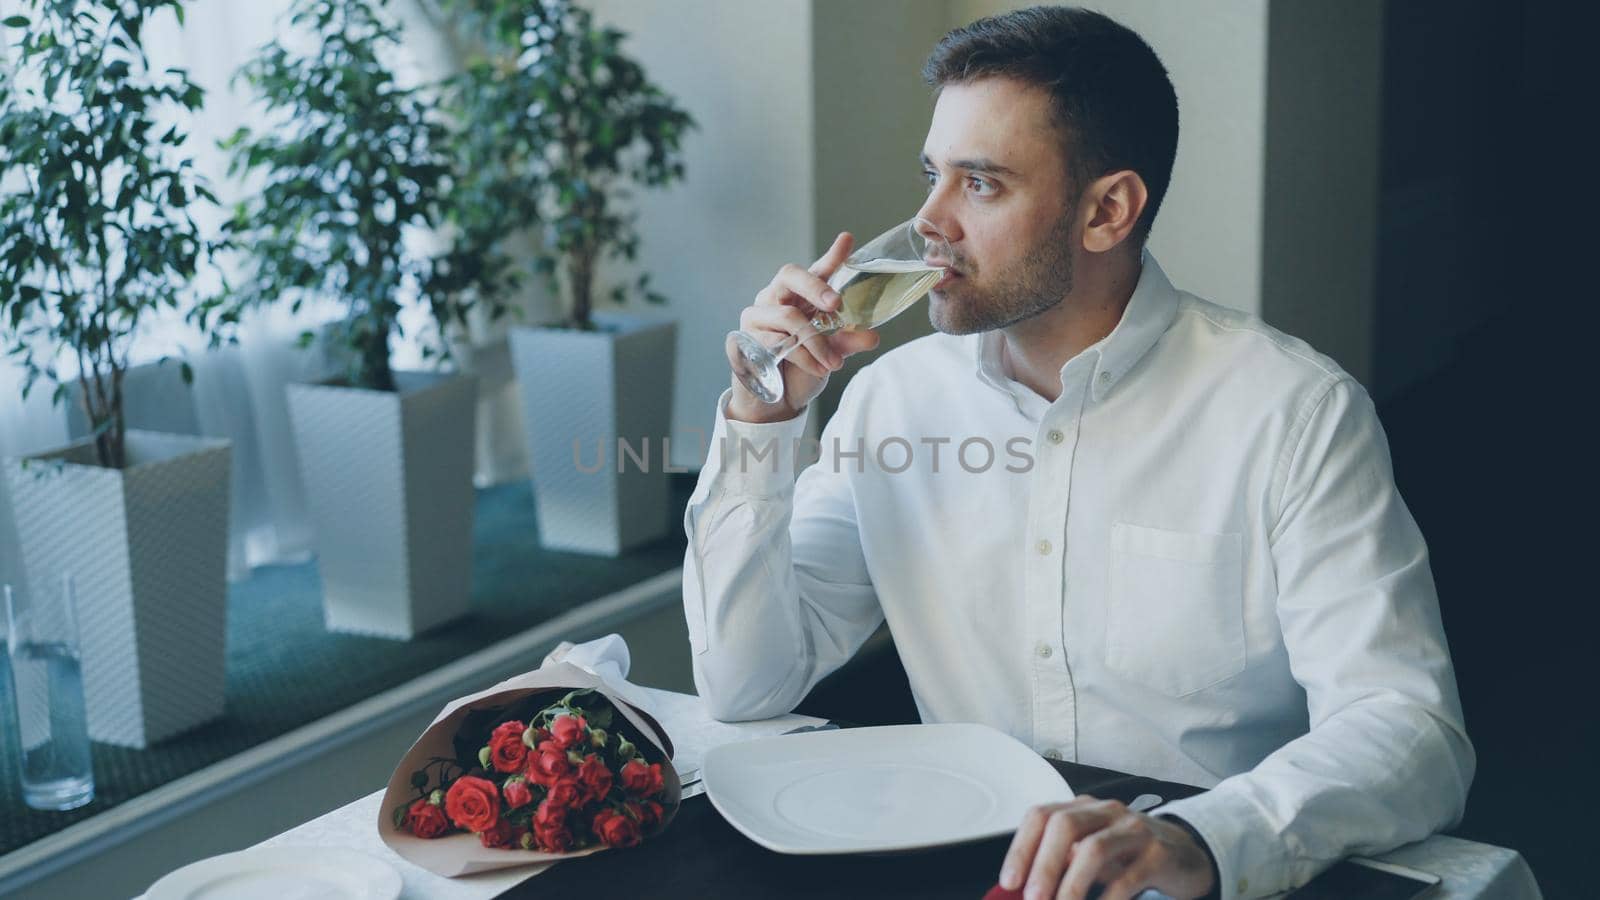 Nervous man is sitting alone at table in restaurant, drinking champagne and waiting for his girlfriend, then leaving. Bunch of red roses, jewelry box and smartphone are visible. by silverkblack